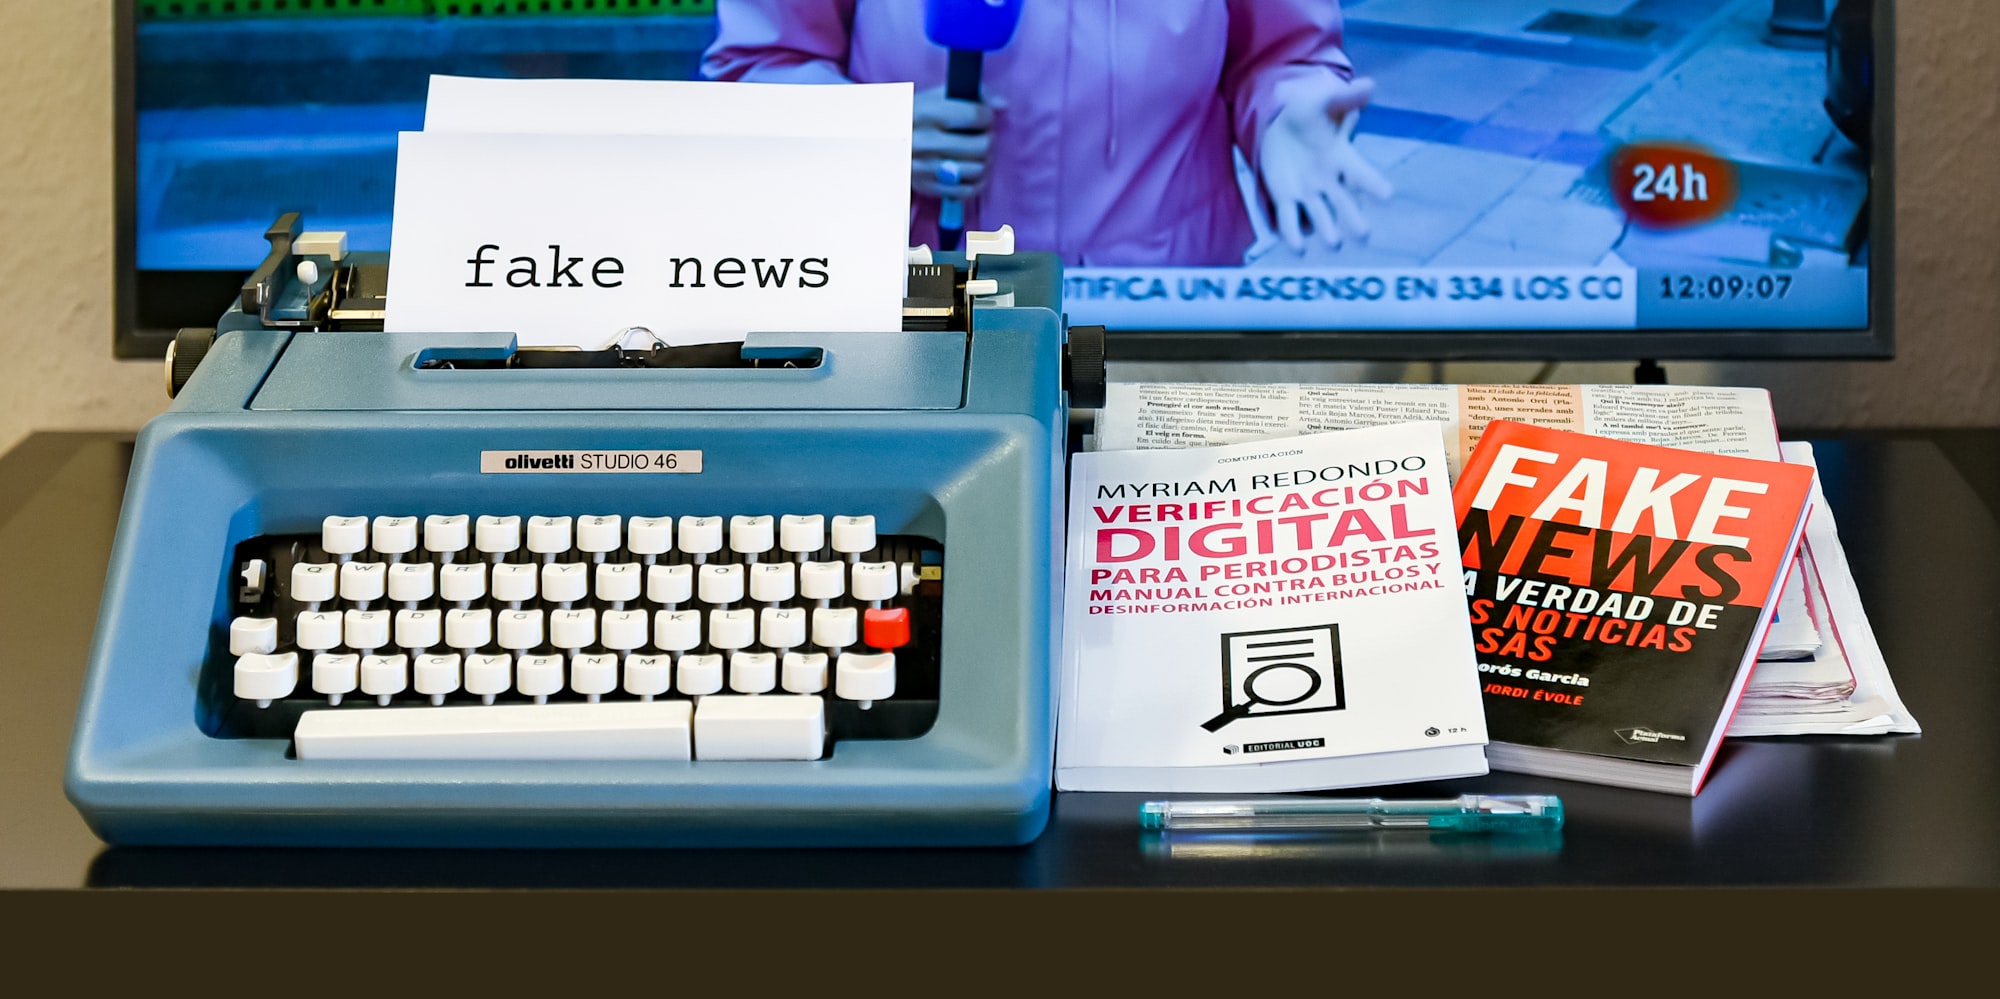 Are We Having a Moral Panic Over Misinformation?